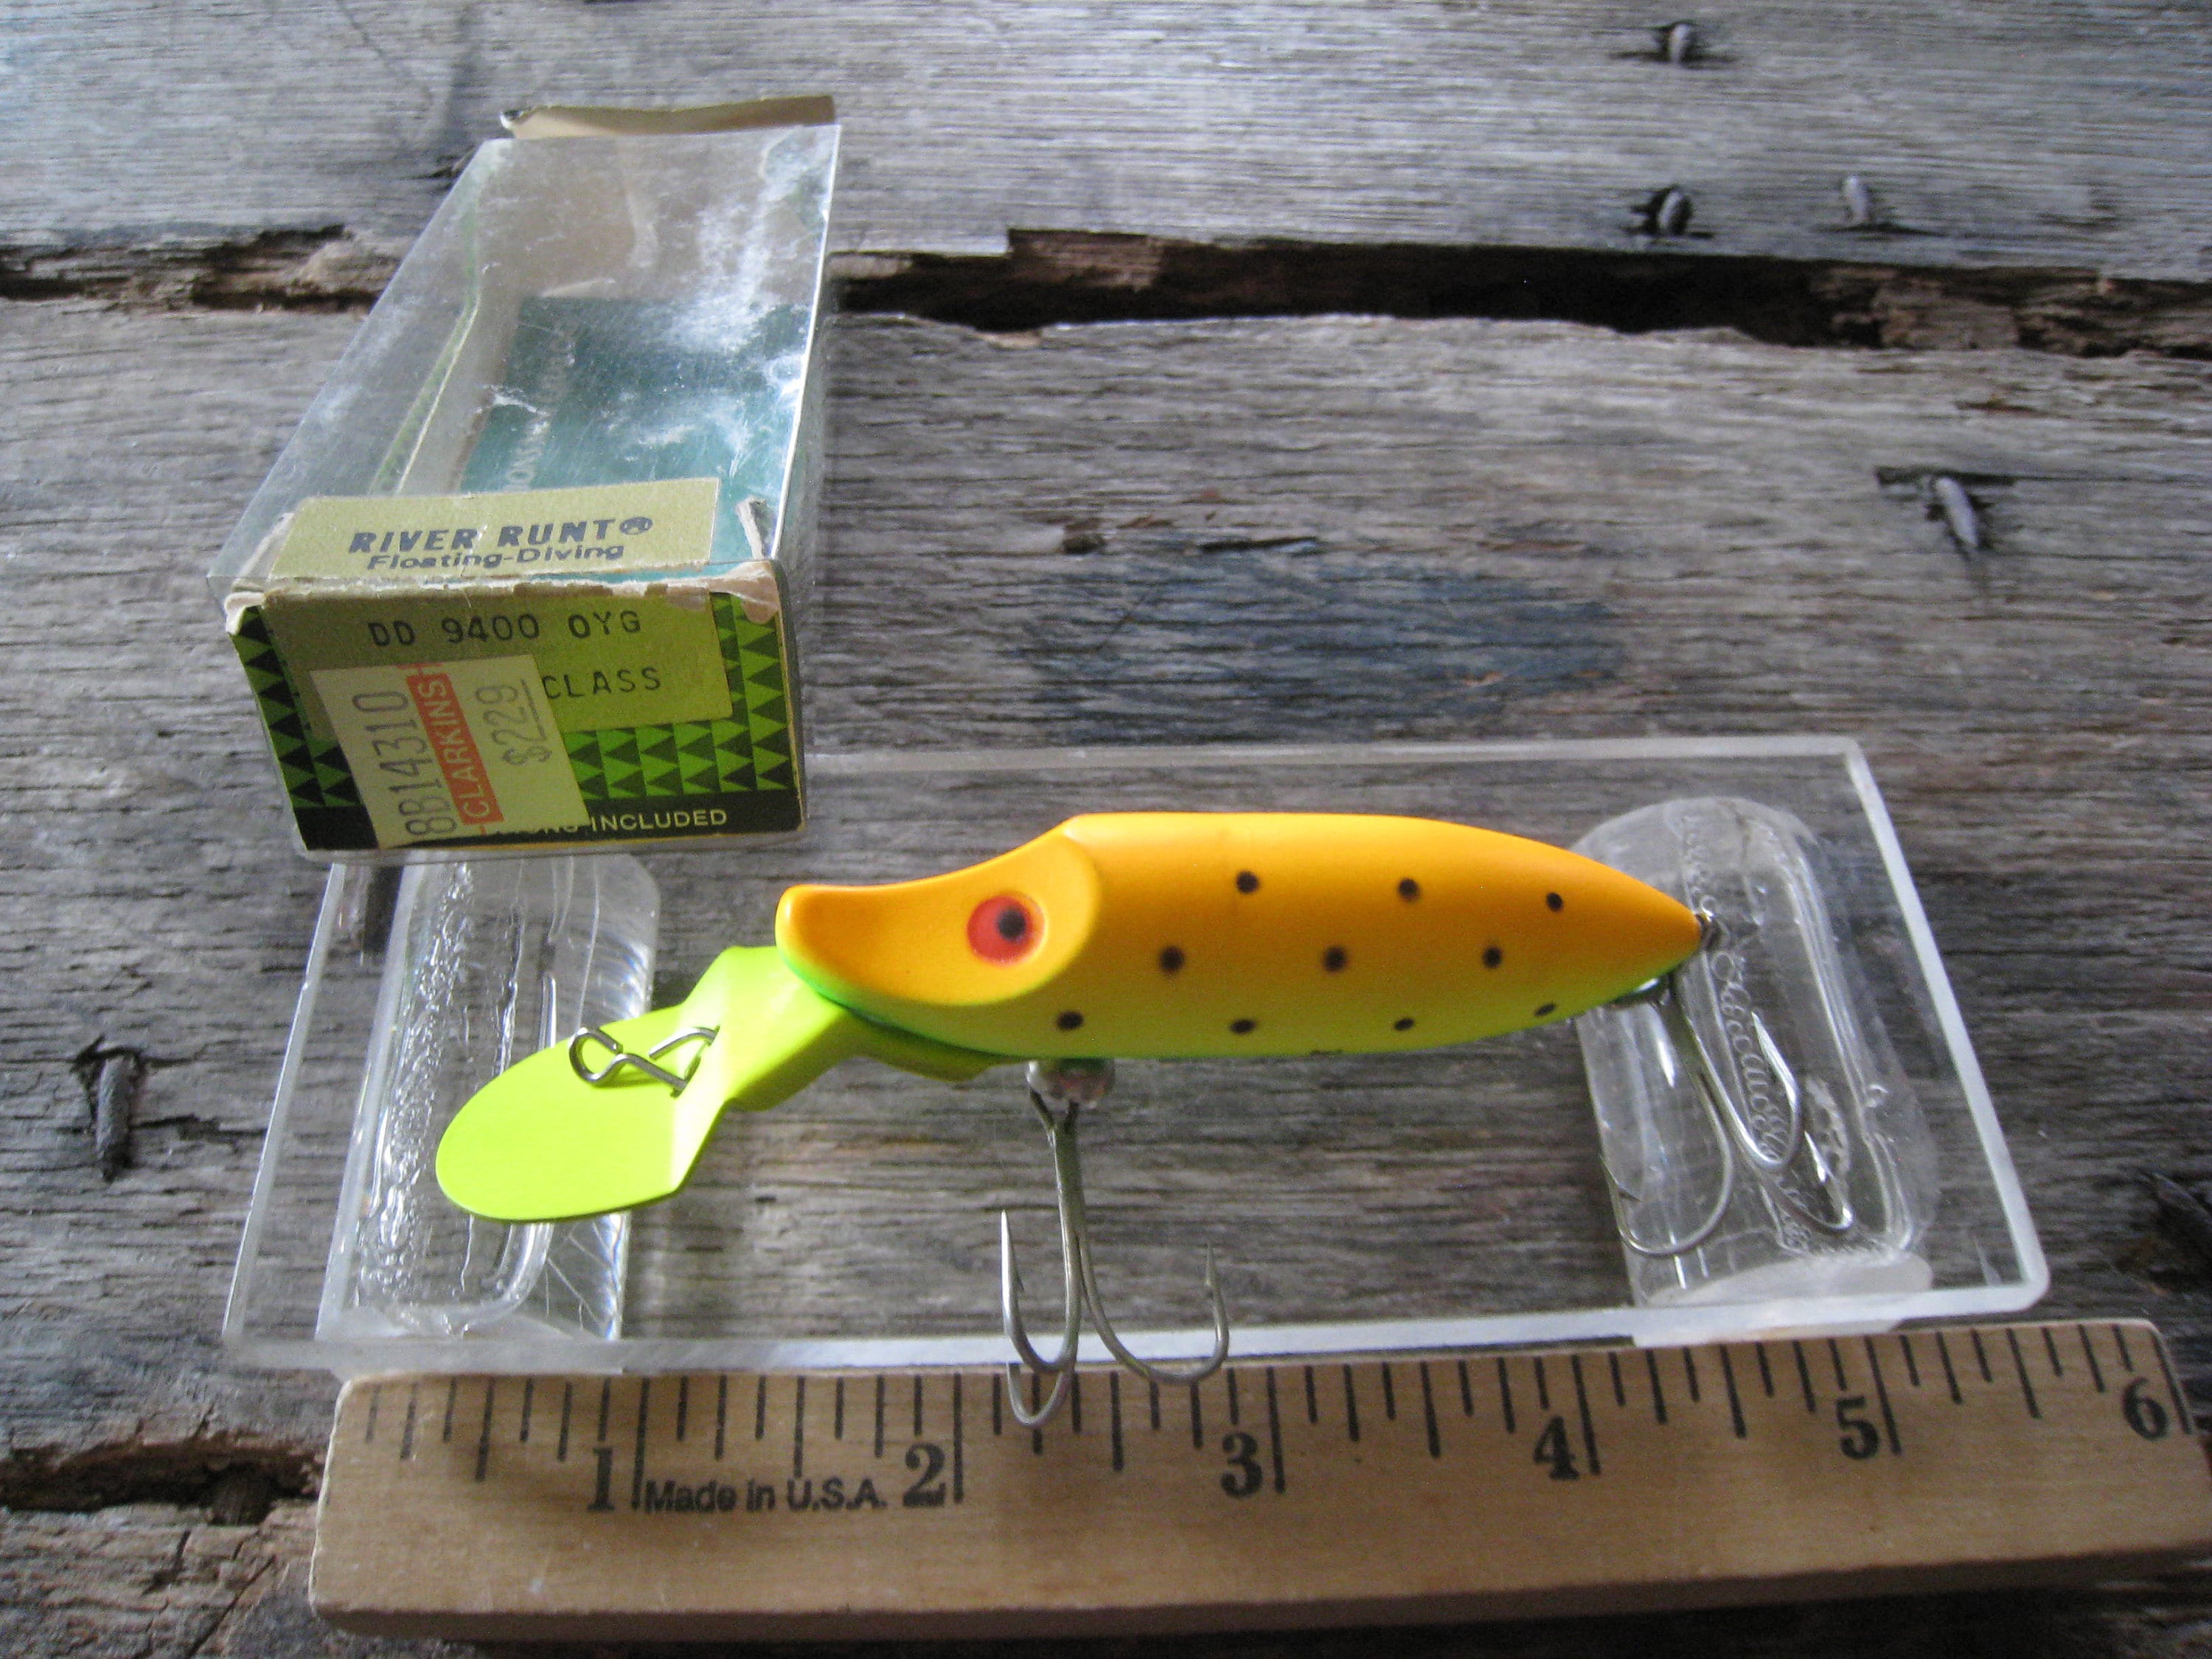 Vintage fishing worm lures 